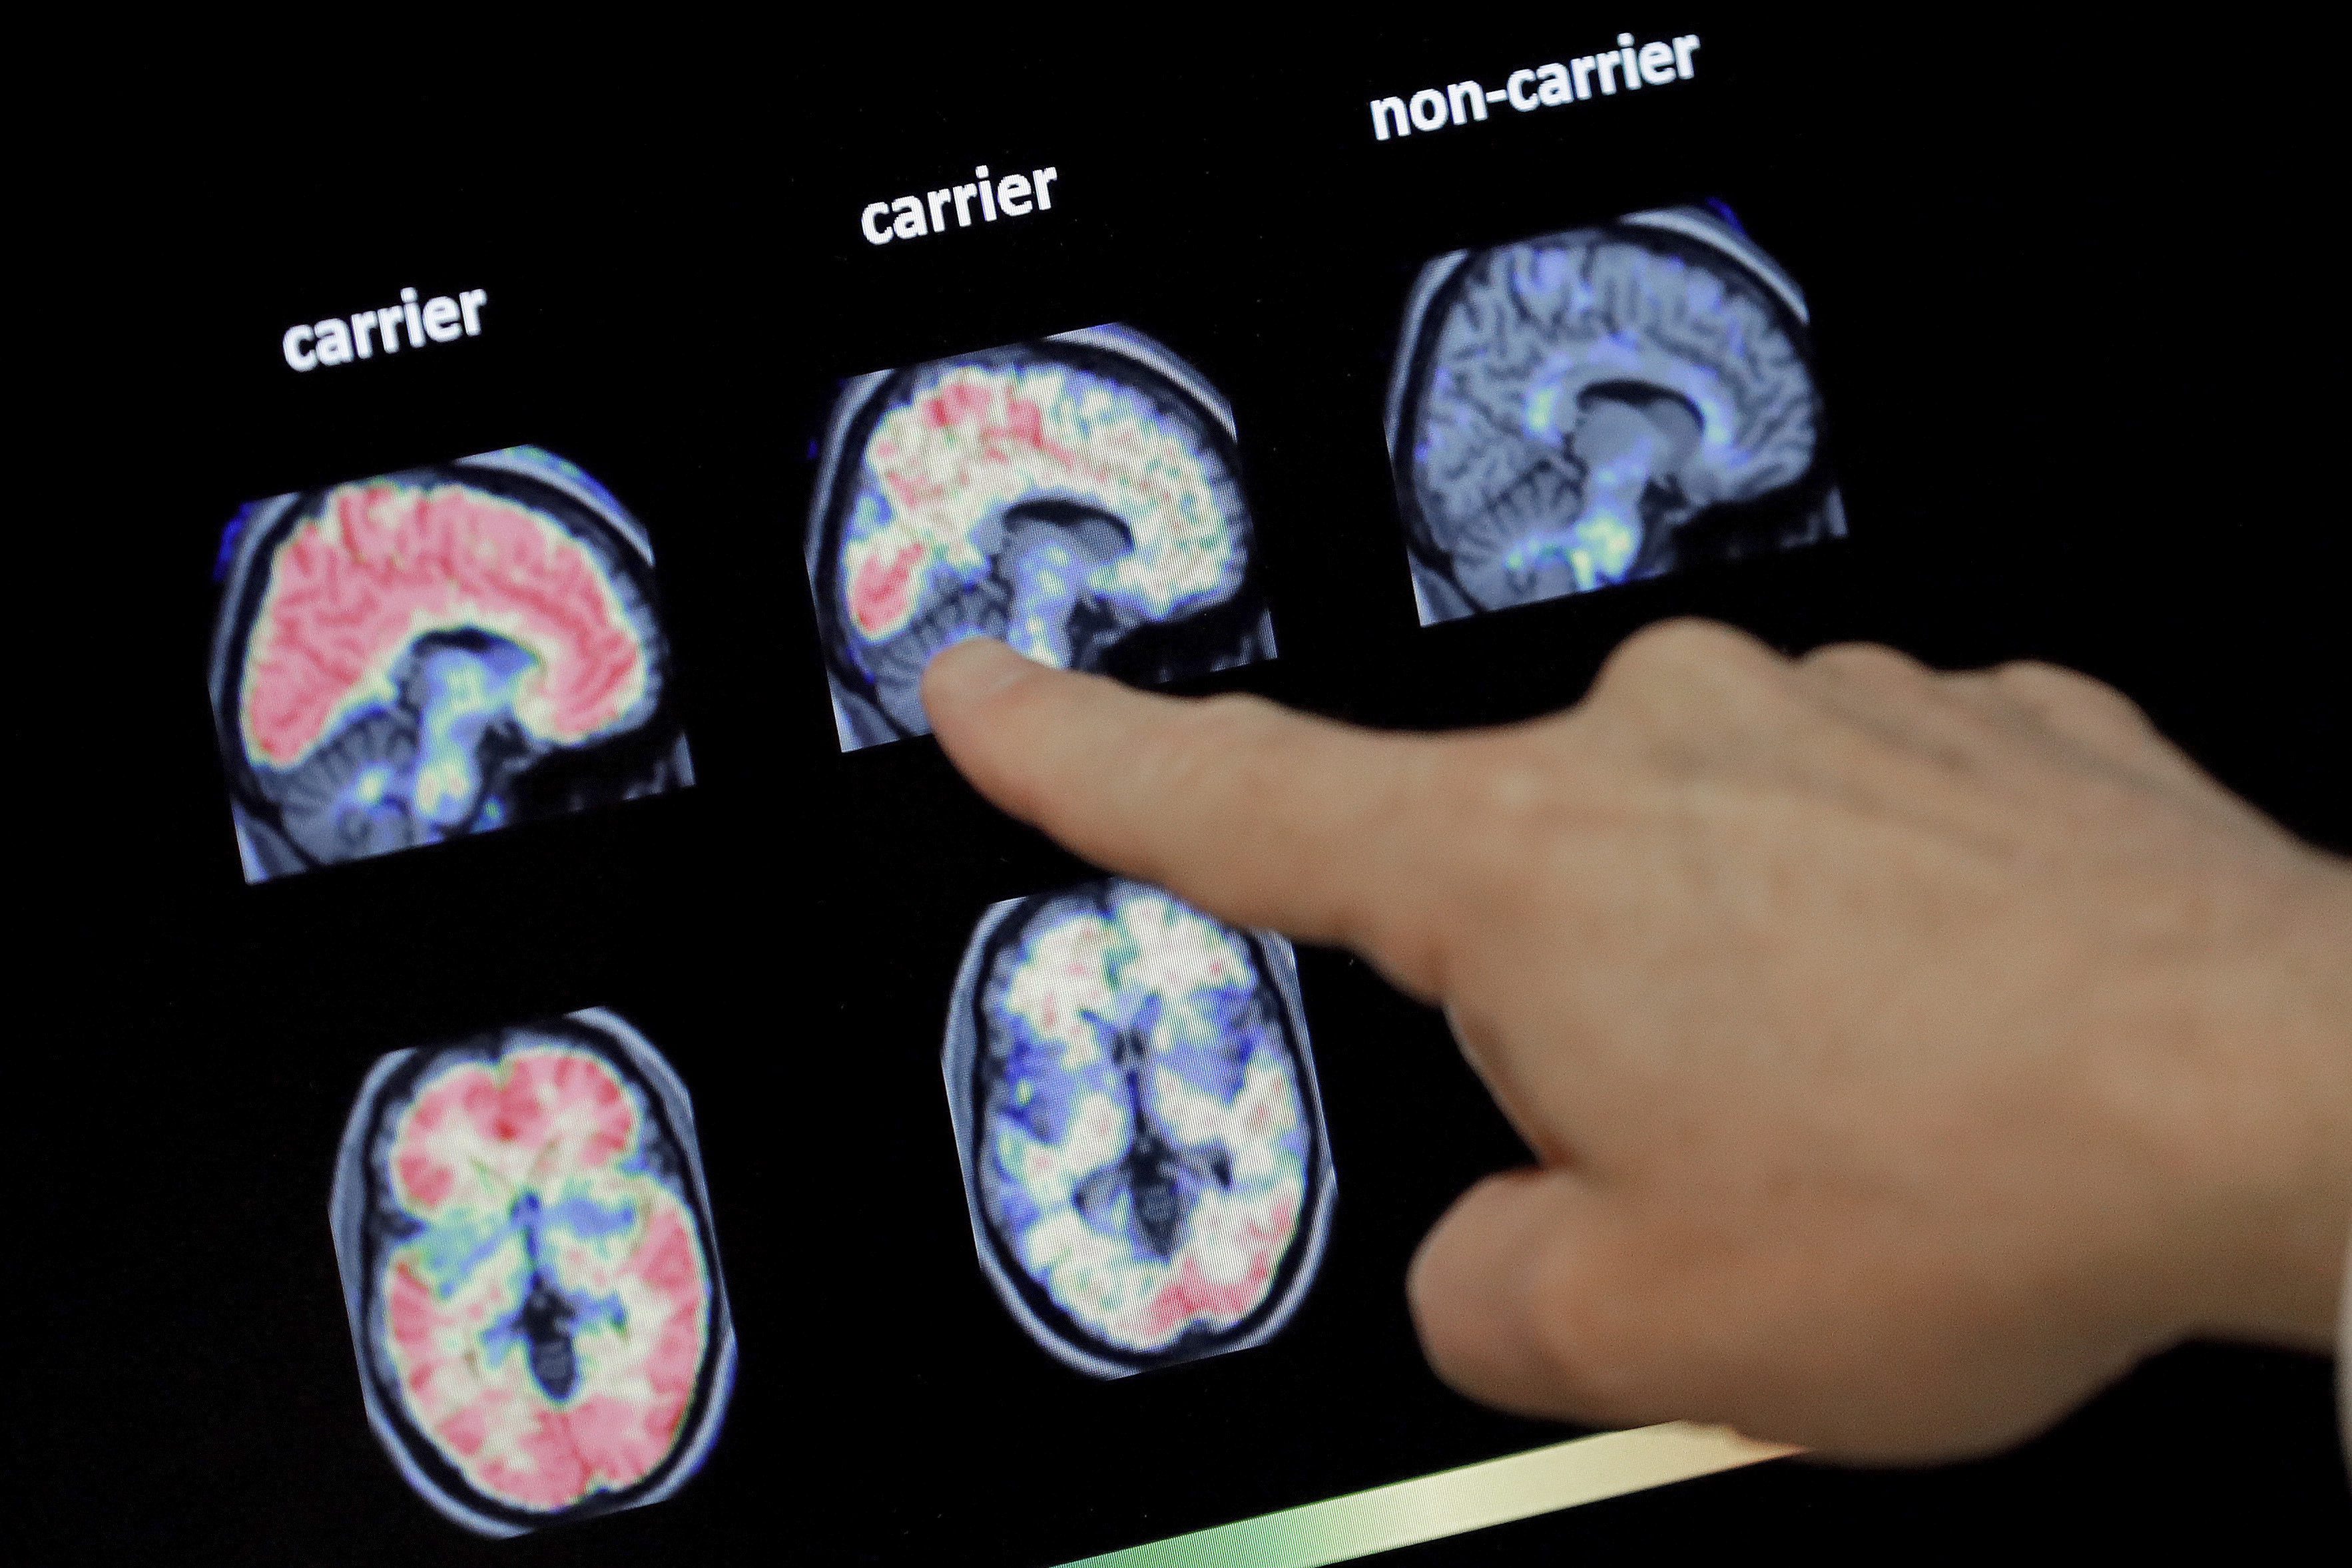 Drug to treat agitation in Alzheimer’s patients approved in Canada